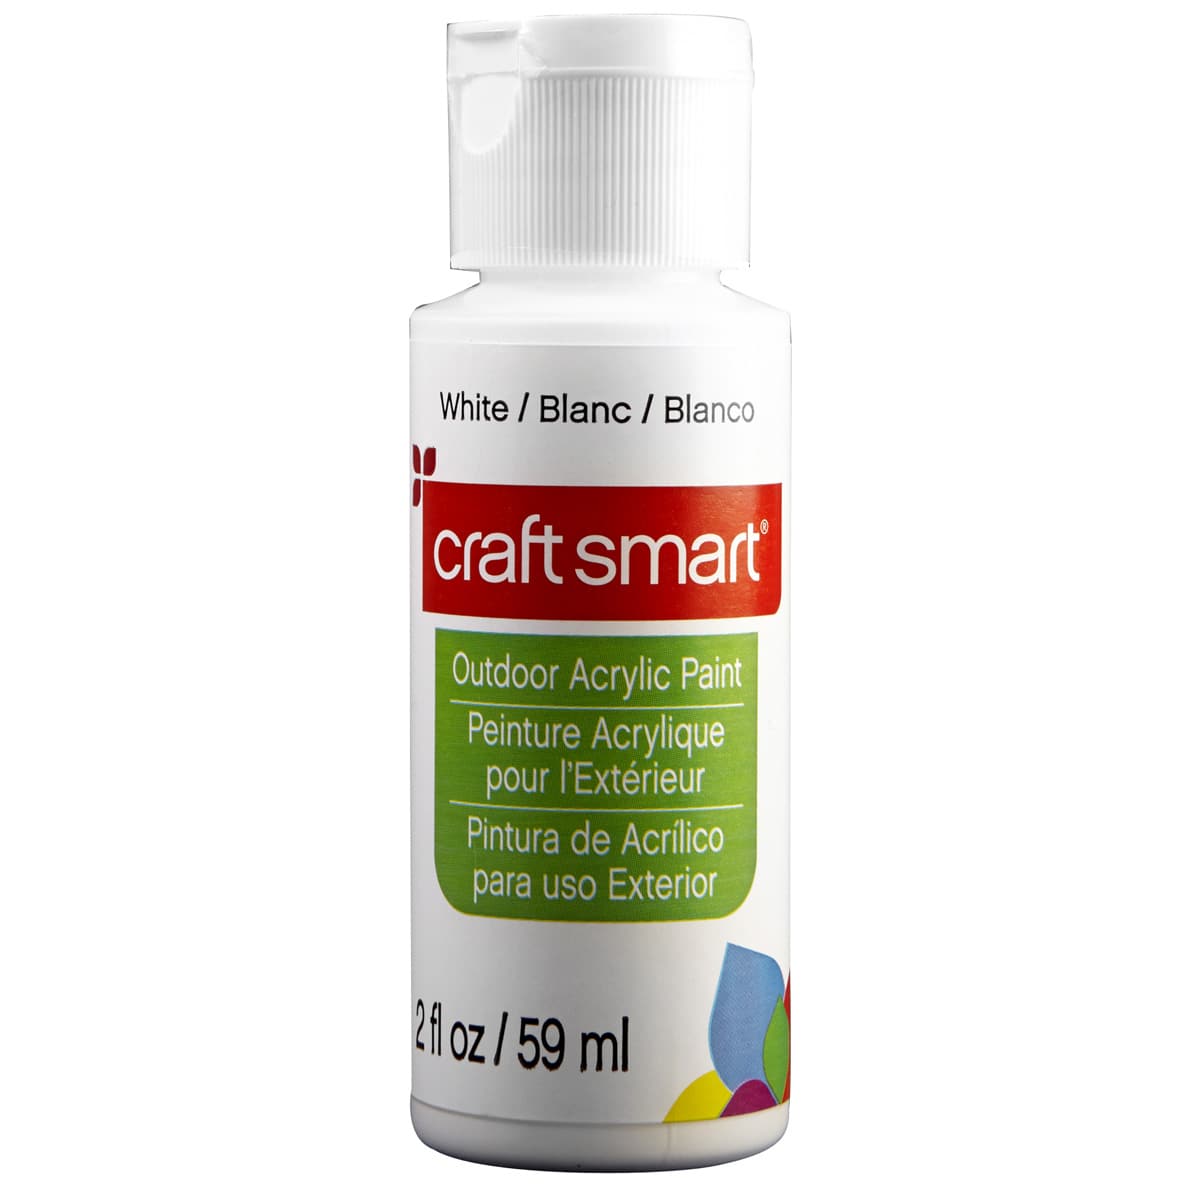  Craft Smart Acrylic Paint 2 Fl.oz. 1 Bottle Brown : Arts,  Crafts & Sewing